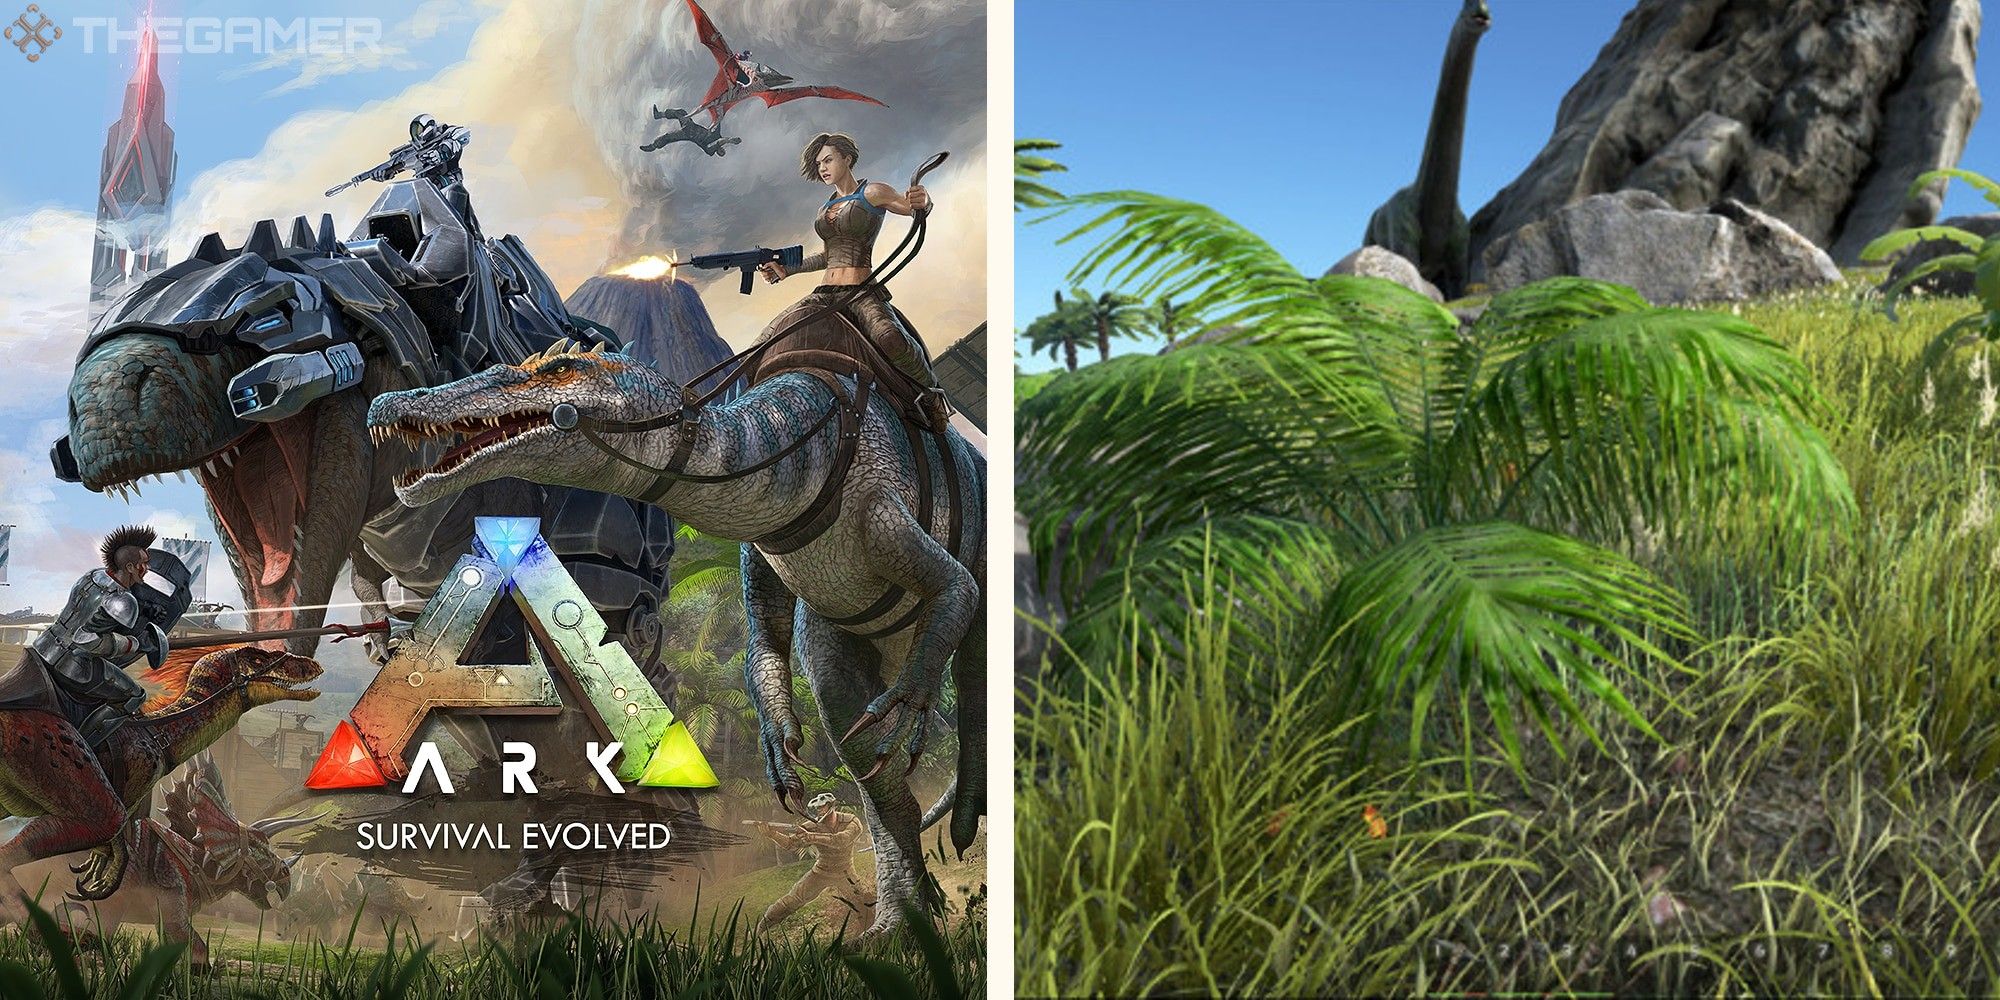 promotional art for ark survival evolved next to image of plant that yields fiber